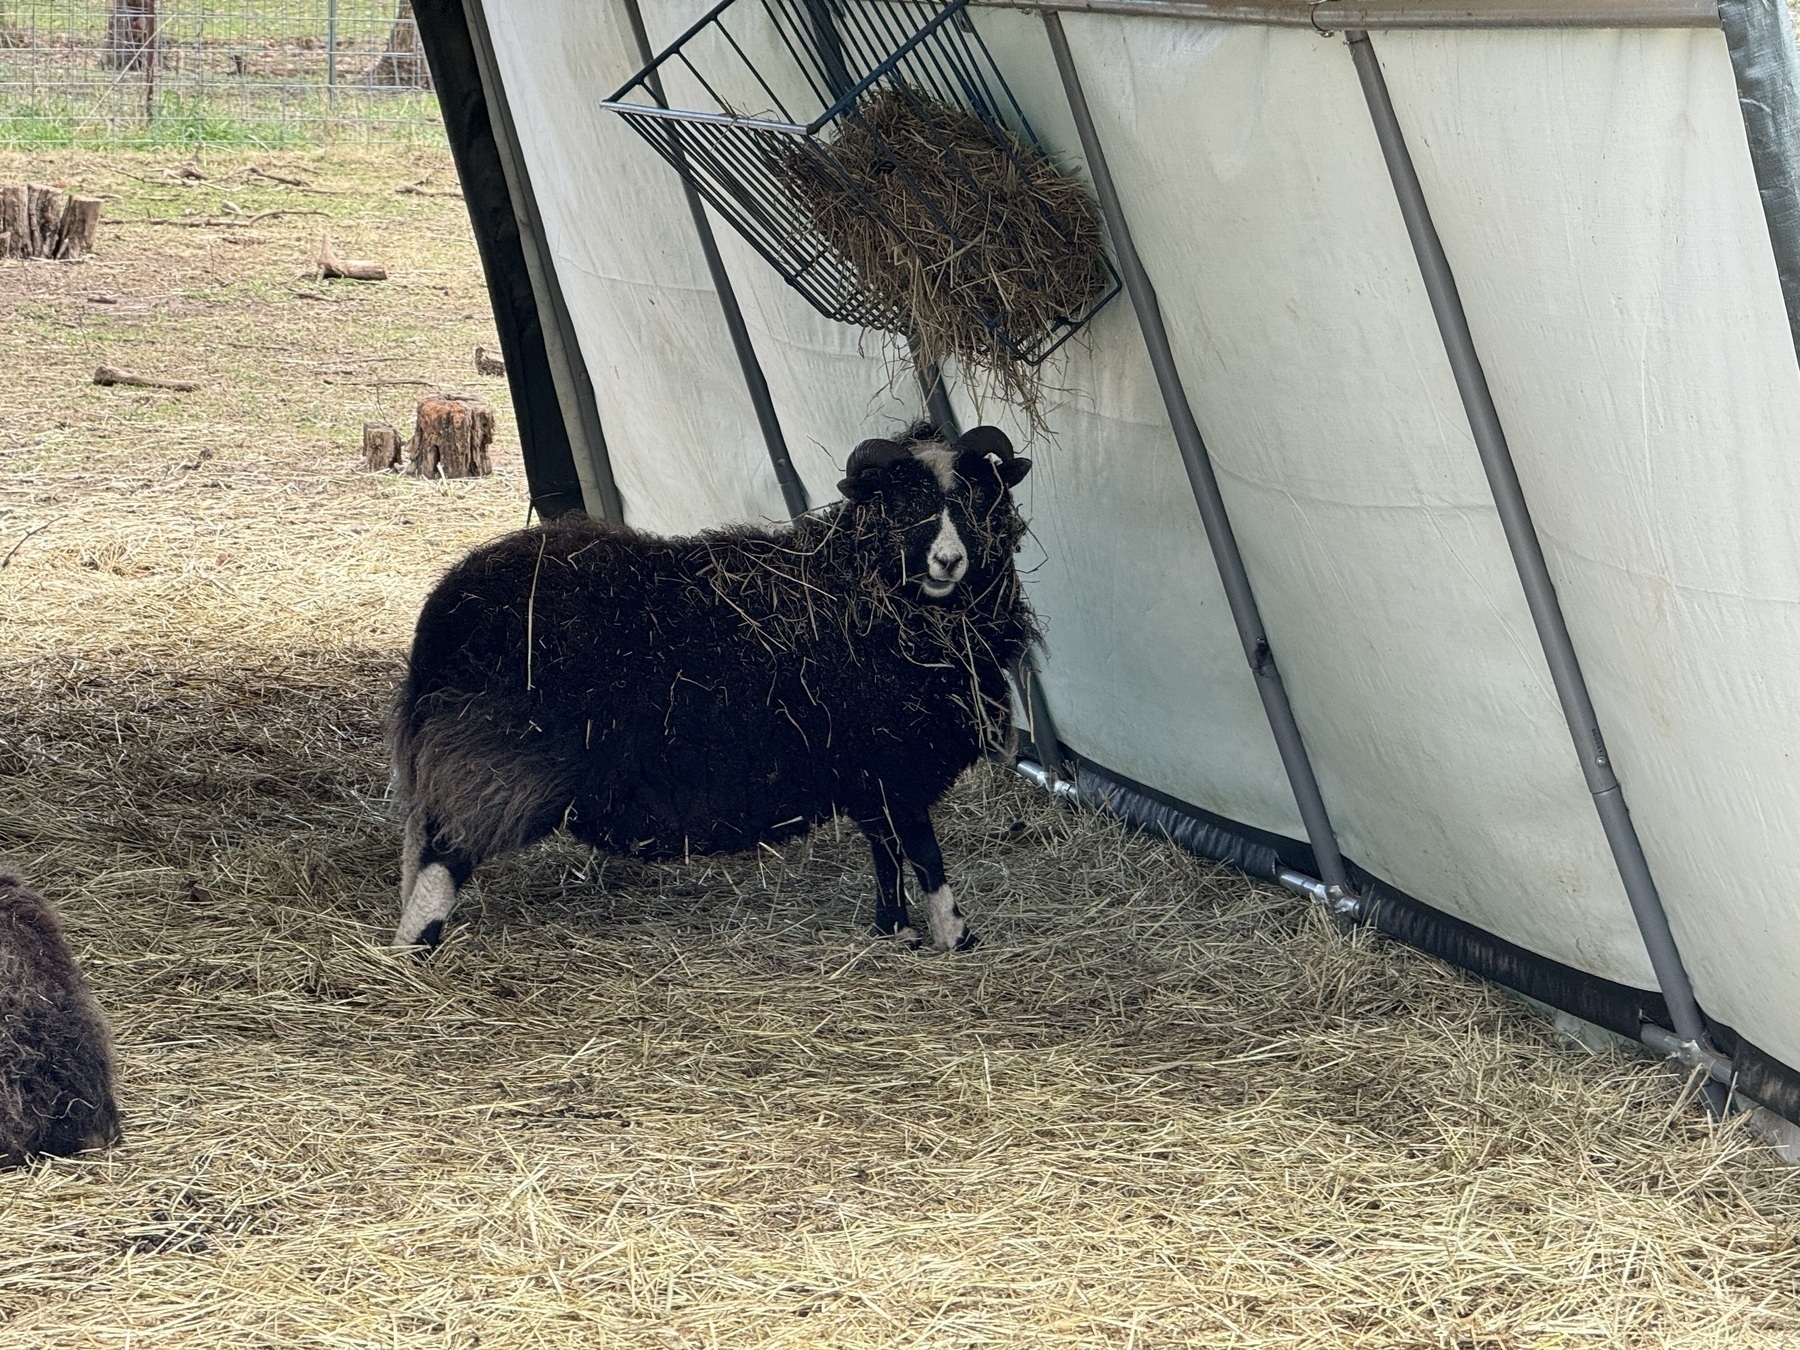 A sheep standing in a shelter with a basket of hay hanging on the wall above it's head.